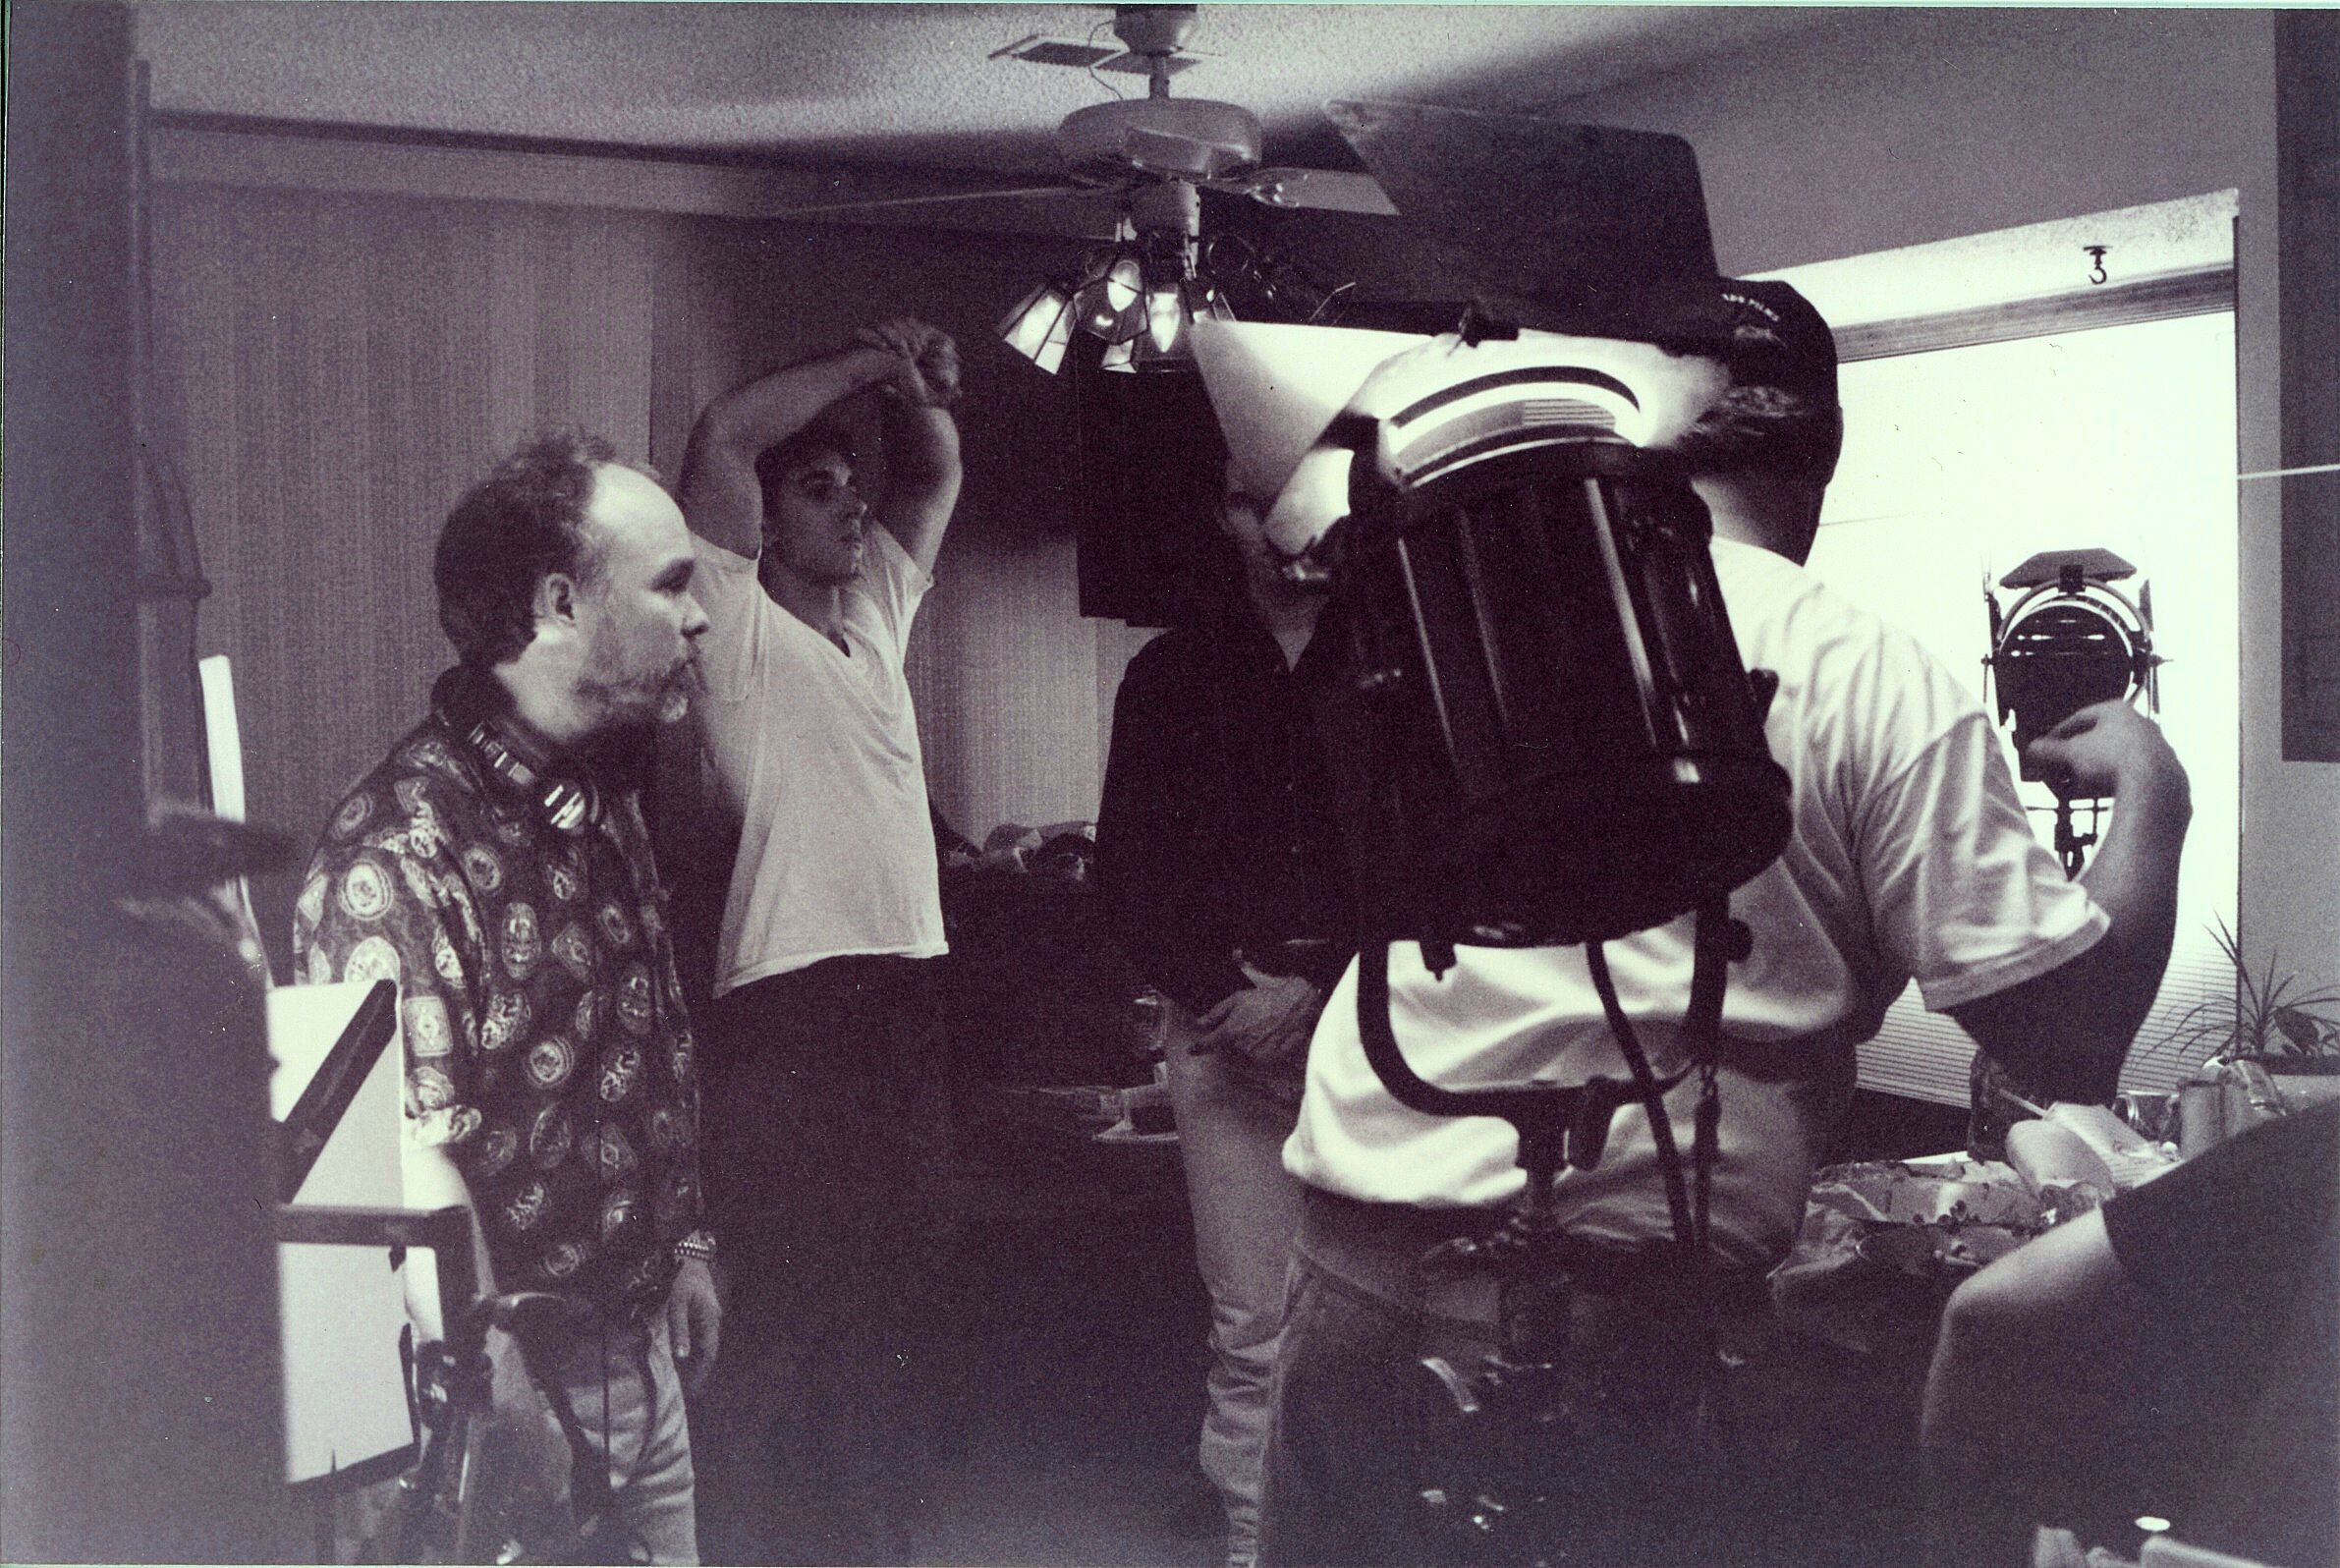 Tom Logan directing on the set of WORKING TITLE at Paramount Studios.